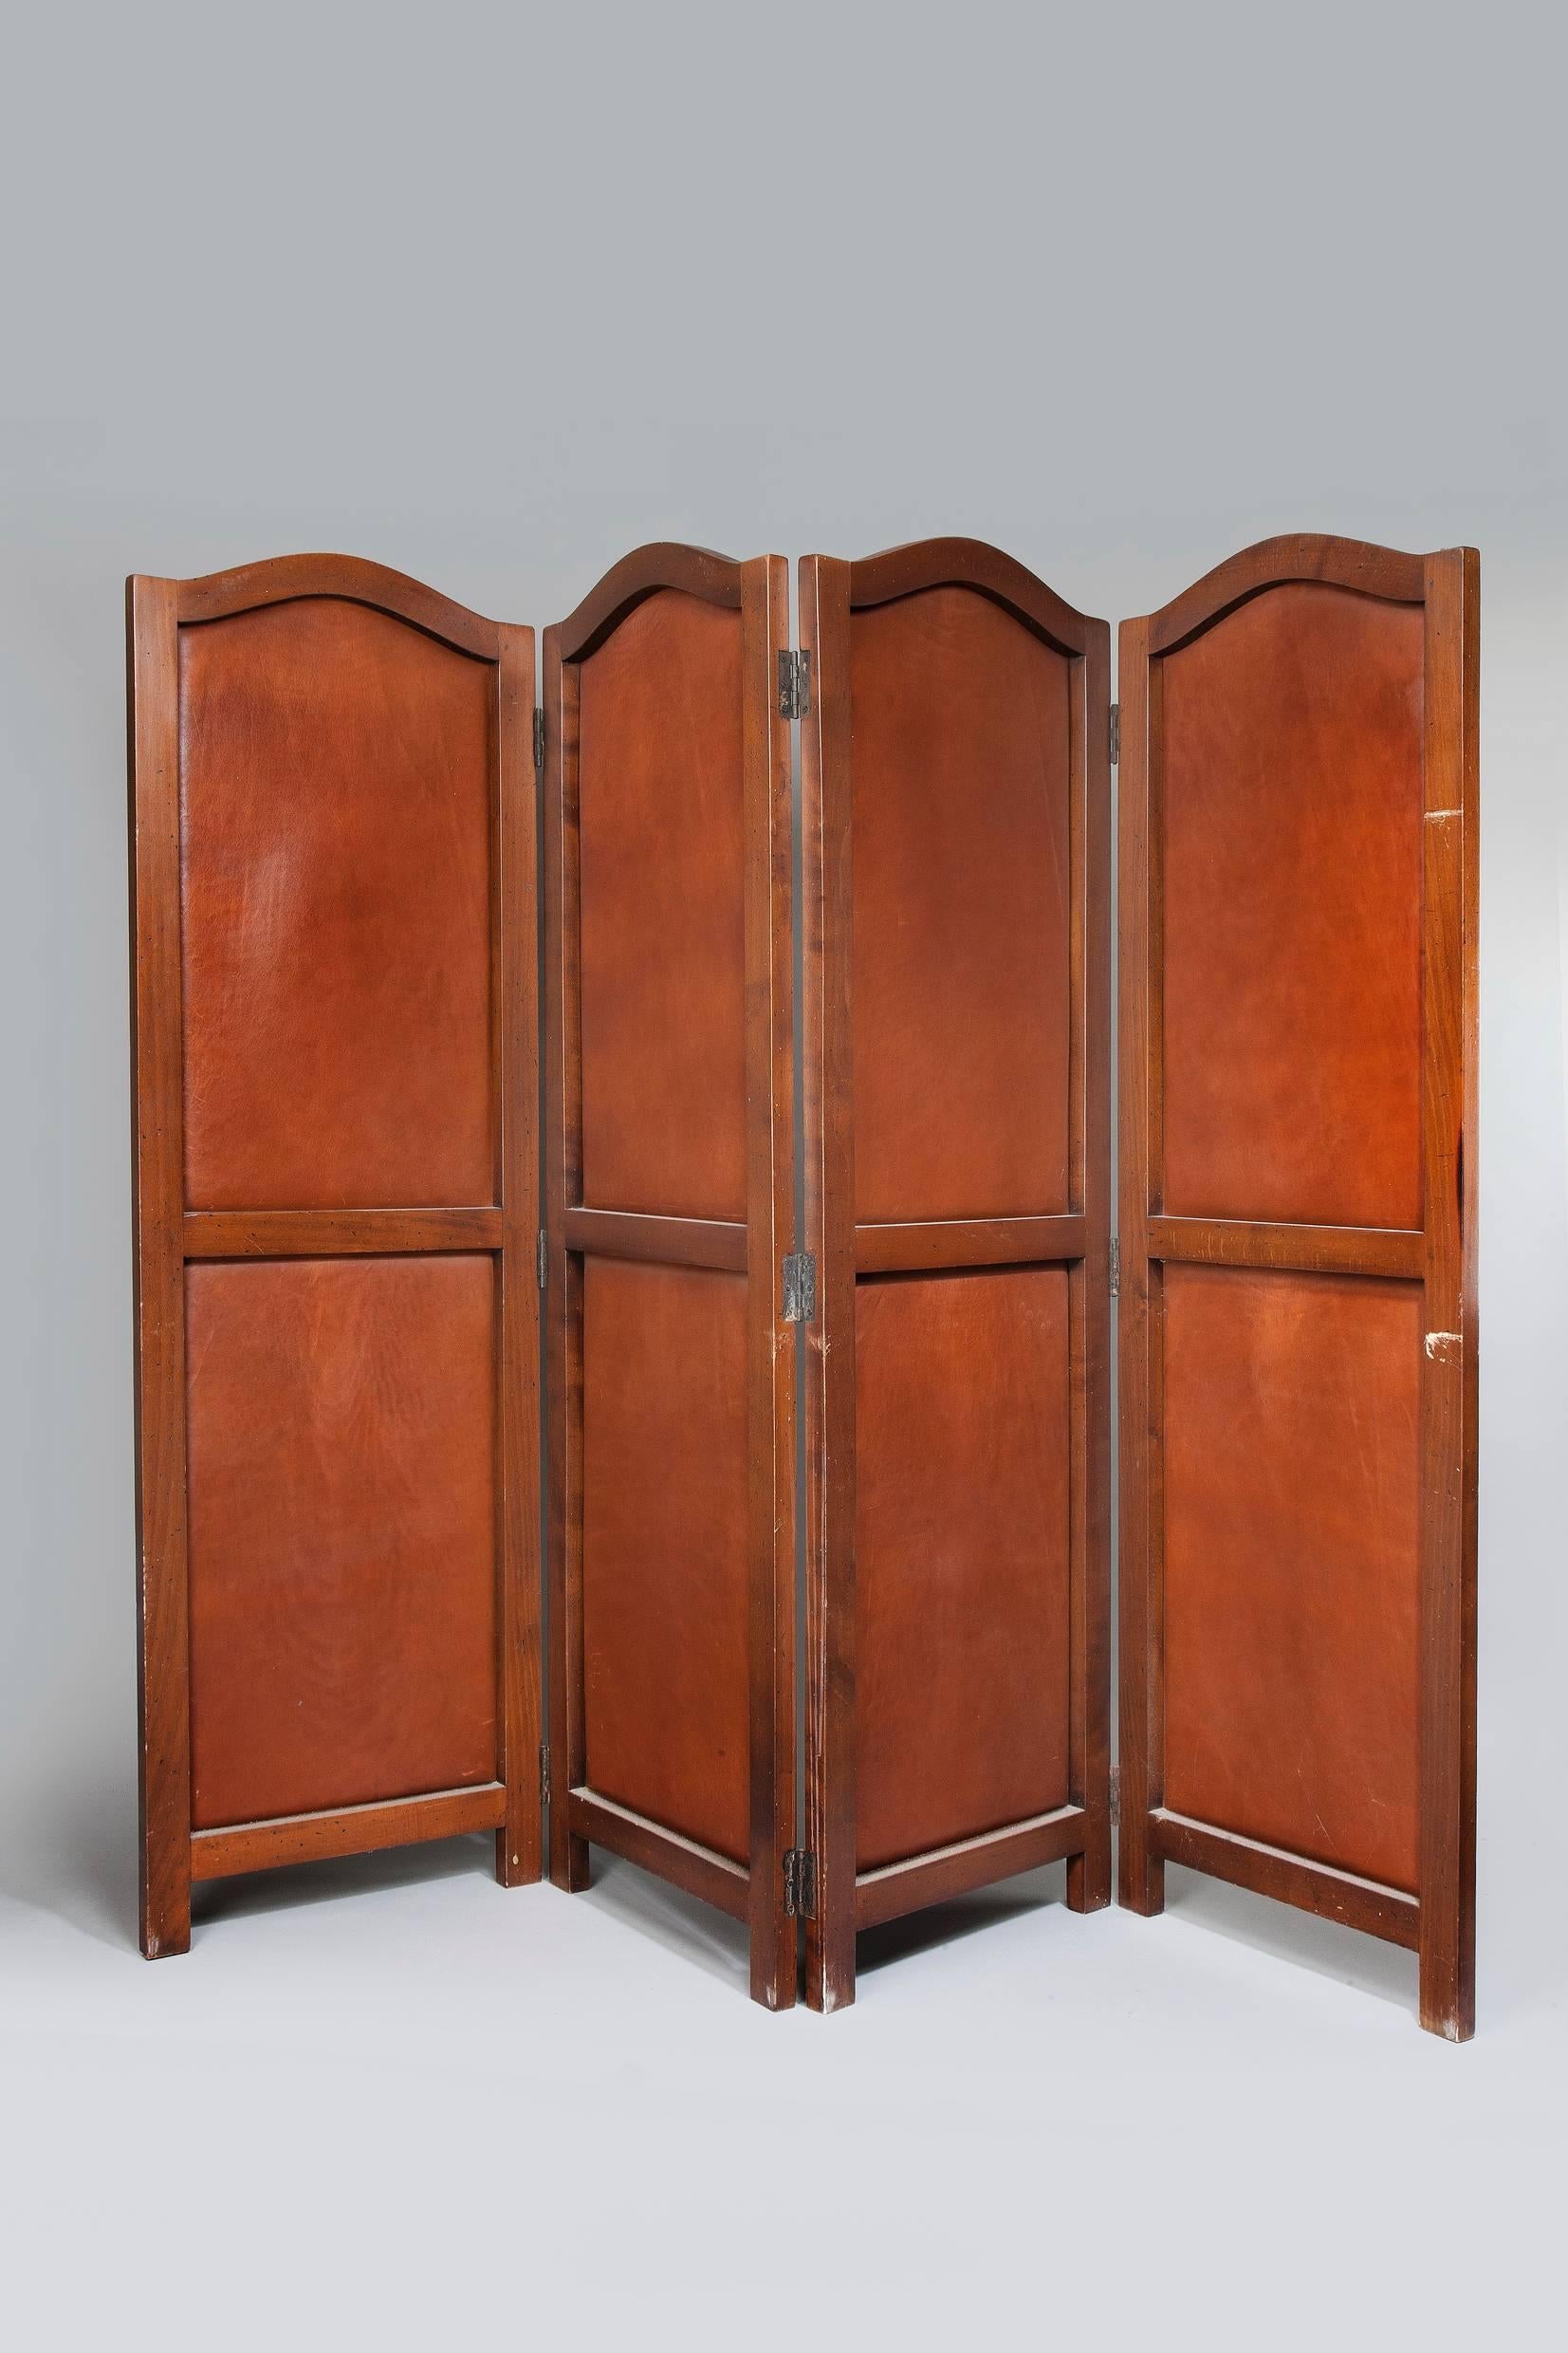 English Art Nouveau Period Leather and Mahogany Four Fold Screen For Sale